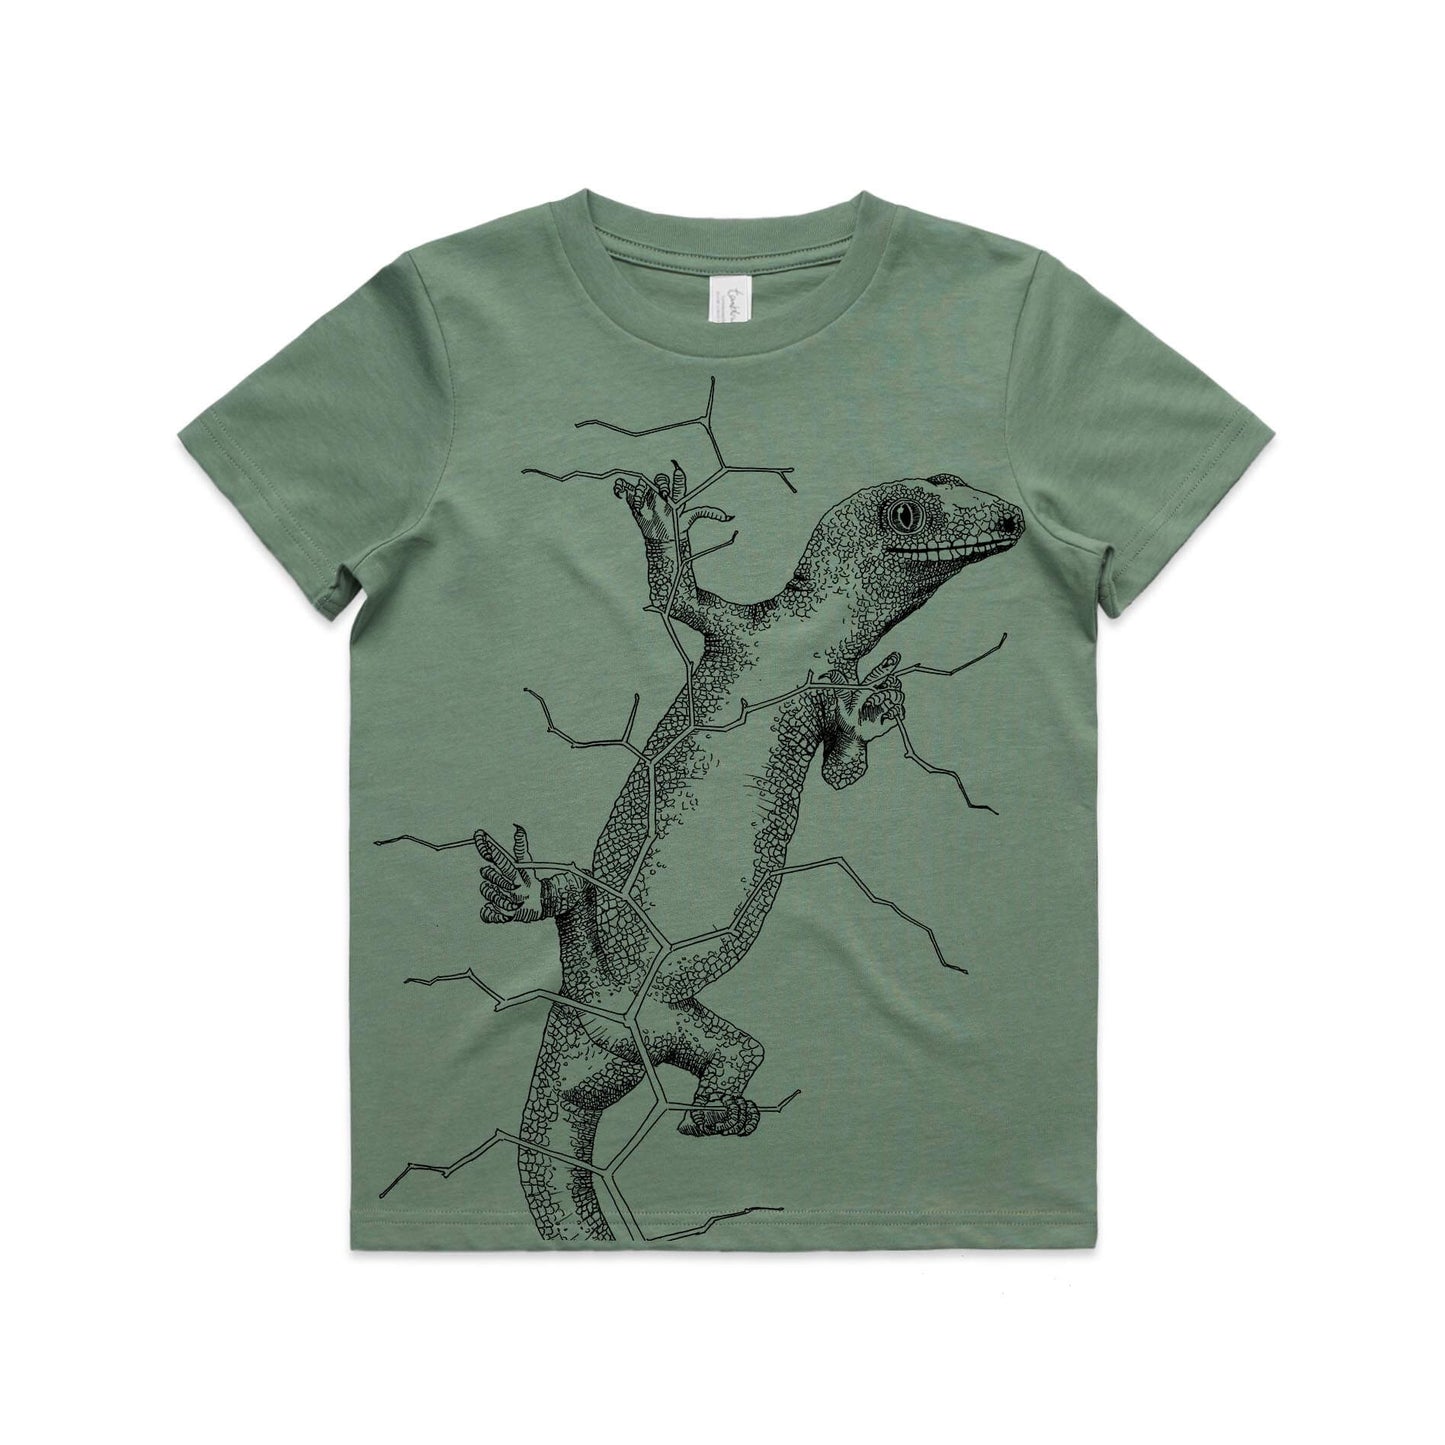 Sage, cotton kids' t-shirt with screen printed gecko design.